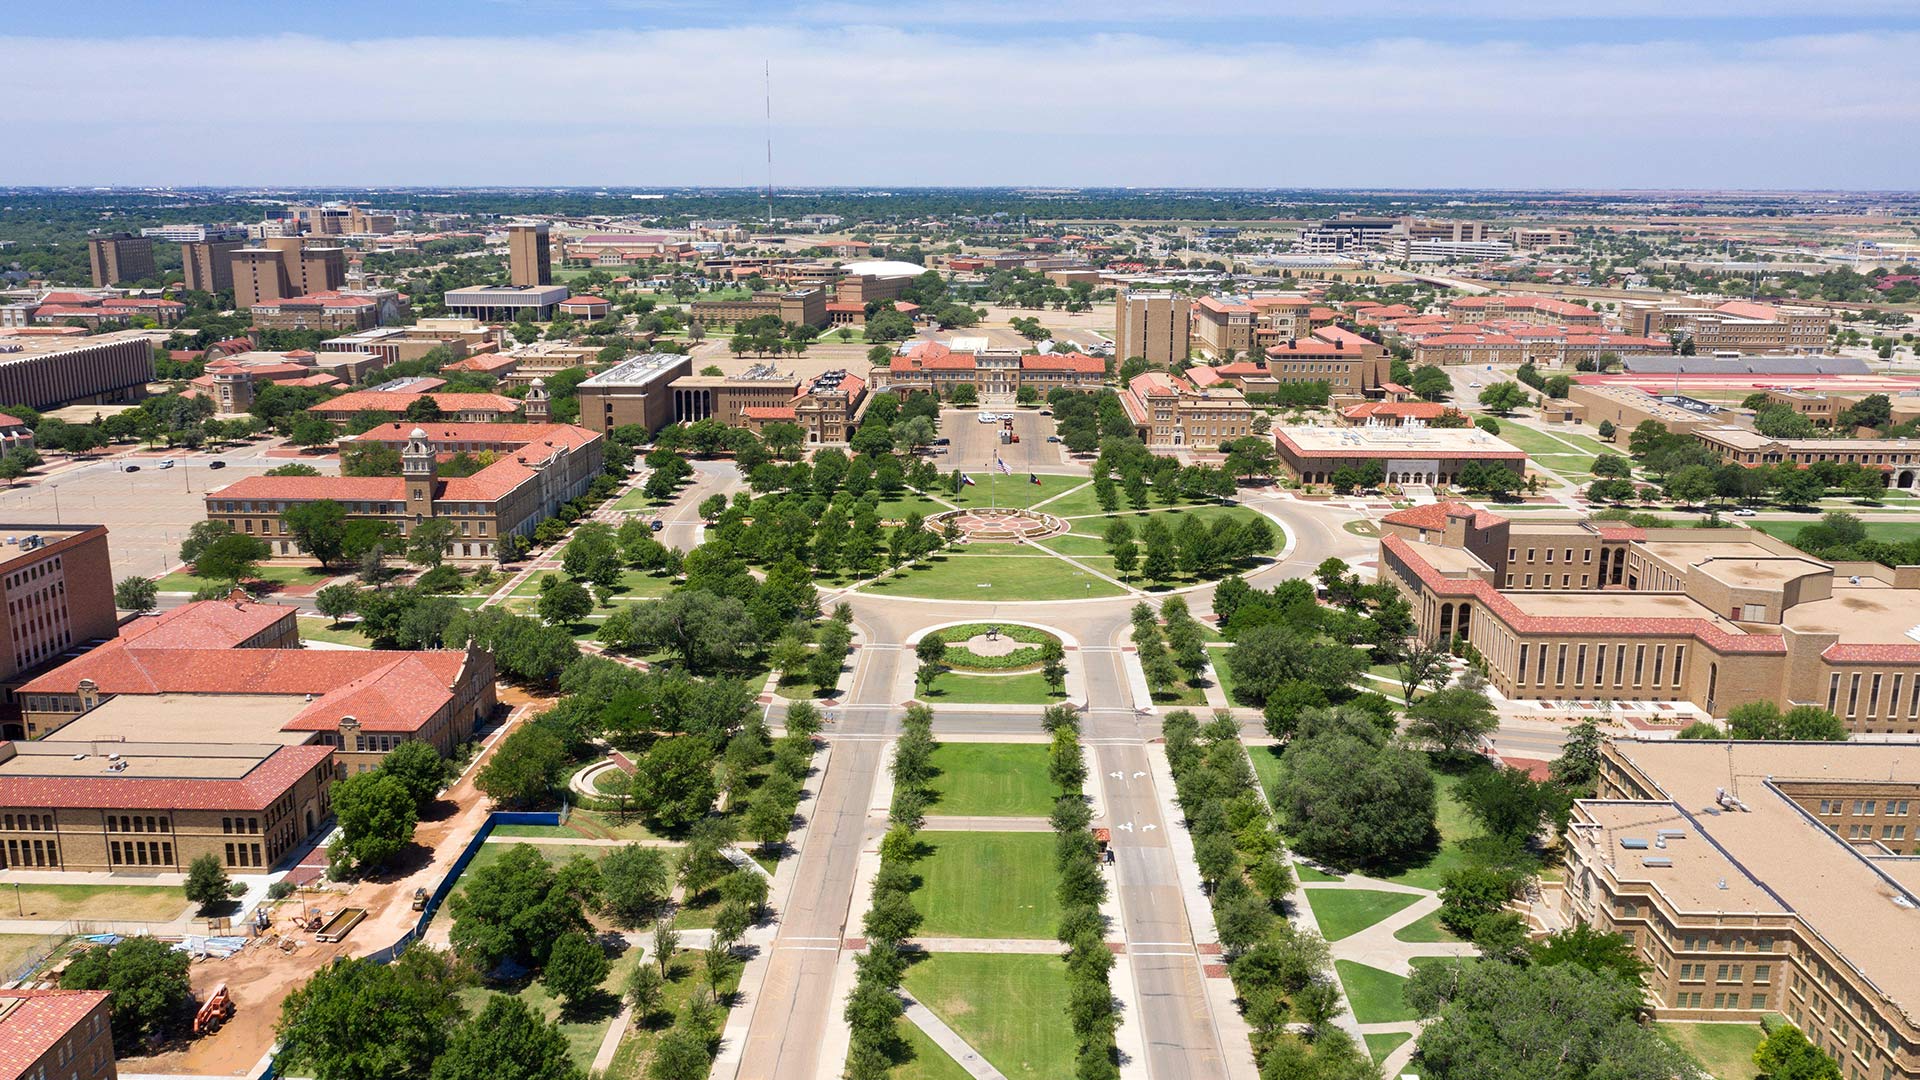 Aerial view of Texas Tech University